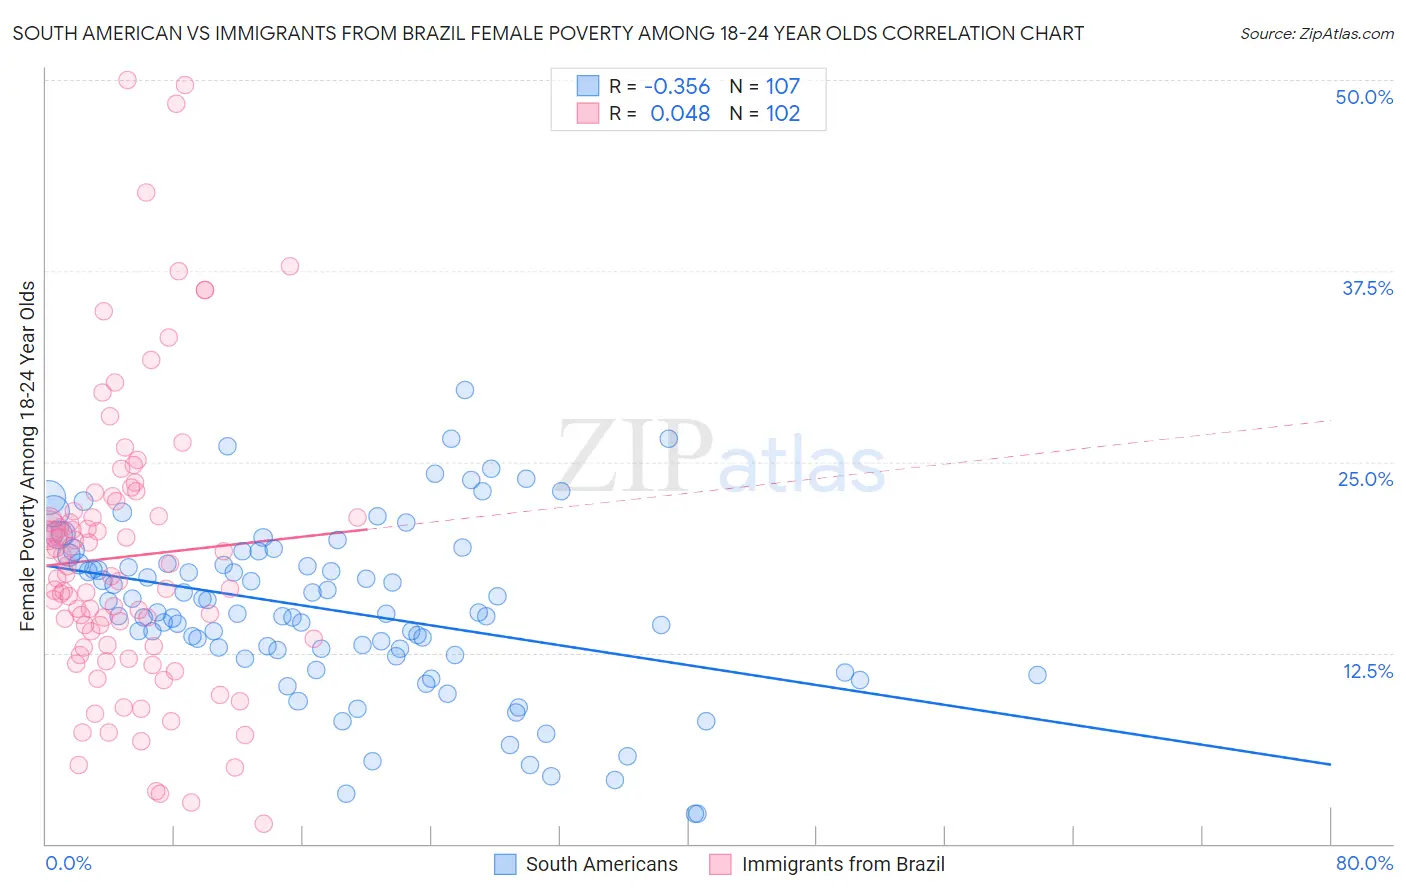 South American vs Immigrants from Brazil Female Poverty Among 18-24 Year Olds